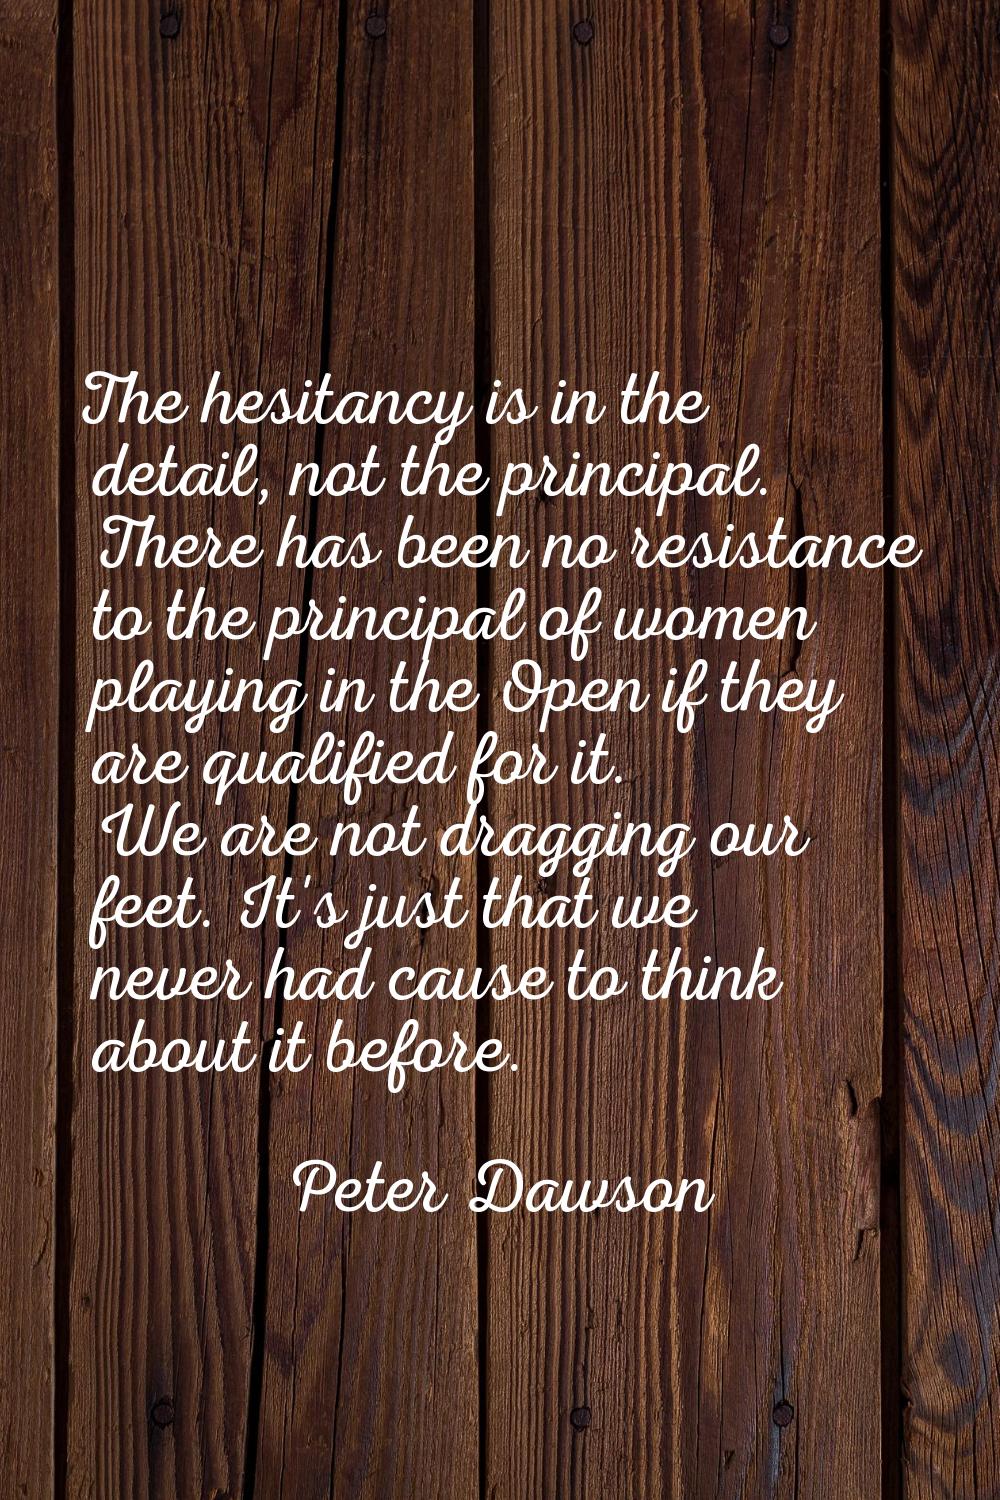 The hesitancy is in the detail, not the principal. There has been no resistance to the principal of